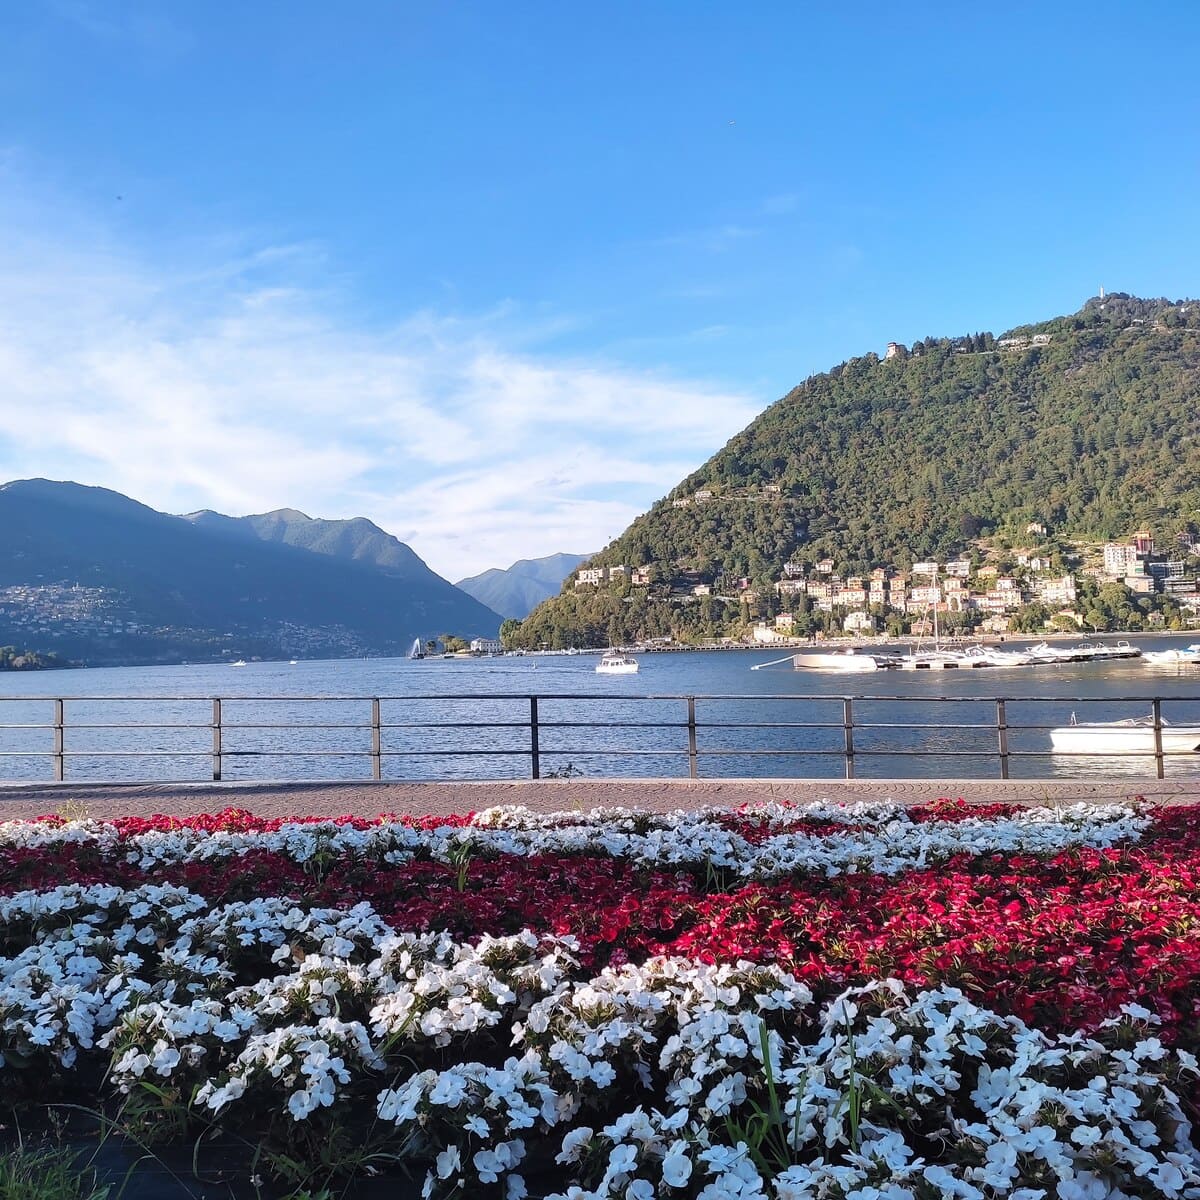 White and pink flowers in the foreground of glittering Lake Como surrounded by wooded hills and mountains